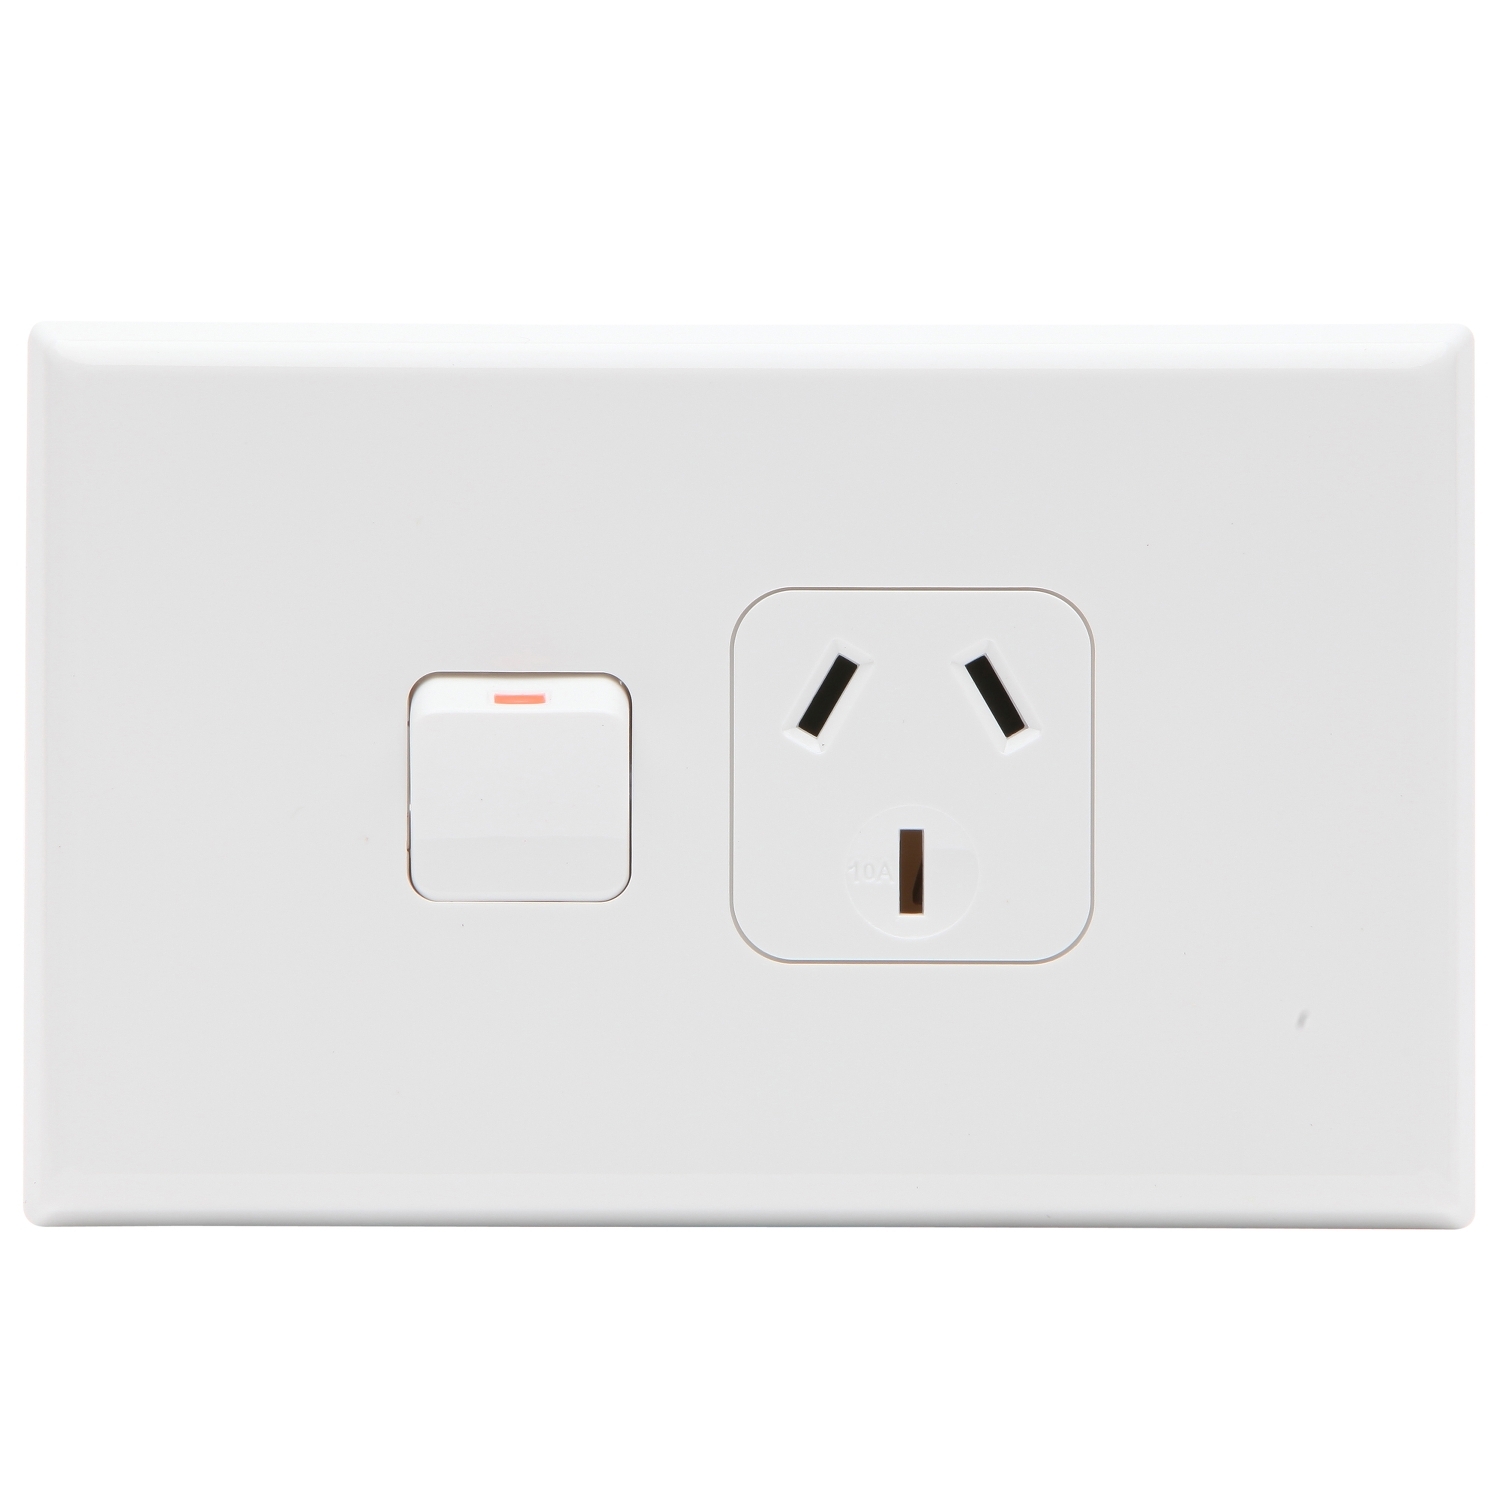 PDL Socket Outlet 600 Series - Single switched - Assembled - Horizontal - 250 V - 10 A - White